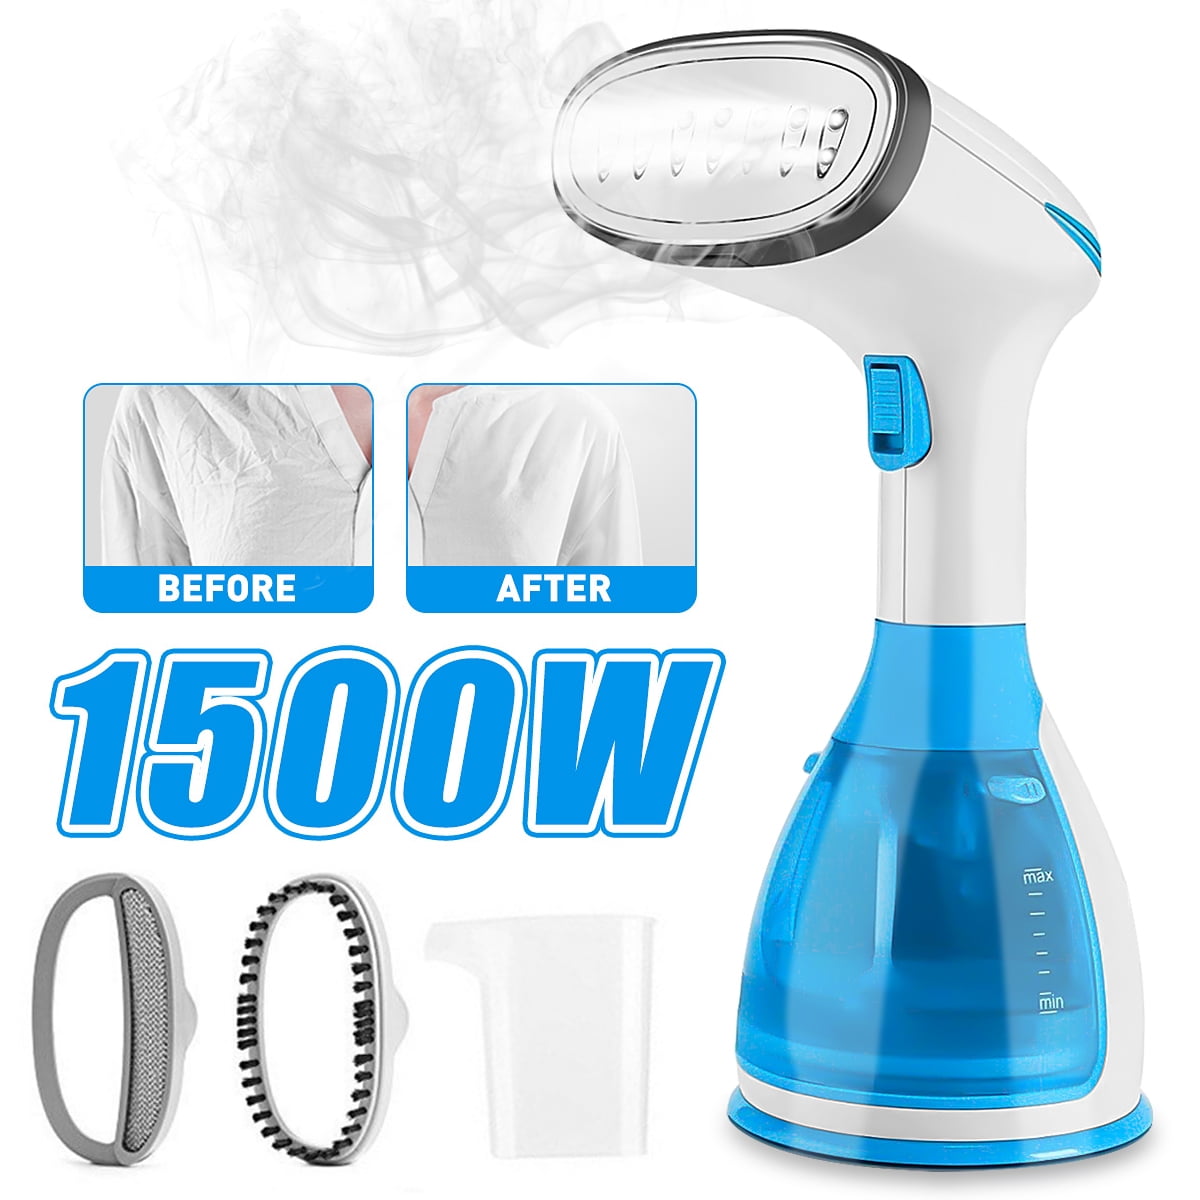 HONGXINYUAN Portable Clothes Steamer Handheld Steam Hanging Ironing Machine Mini Clothes Garment Steamer Laundry Electric Iron Travel Home